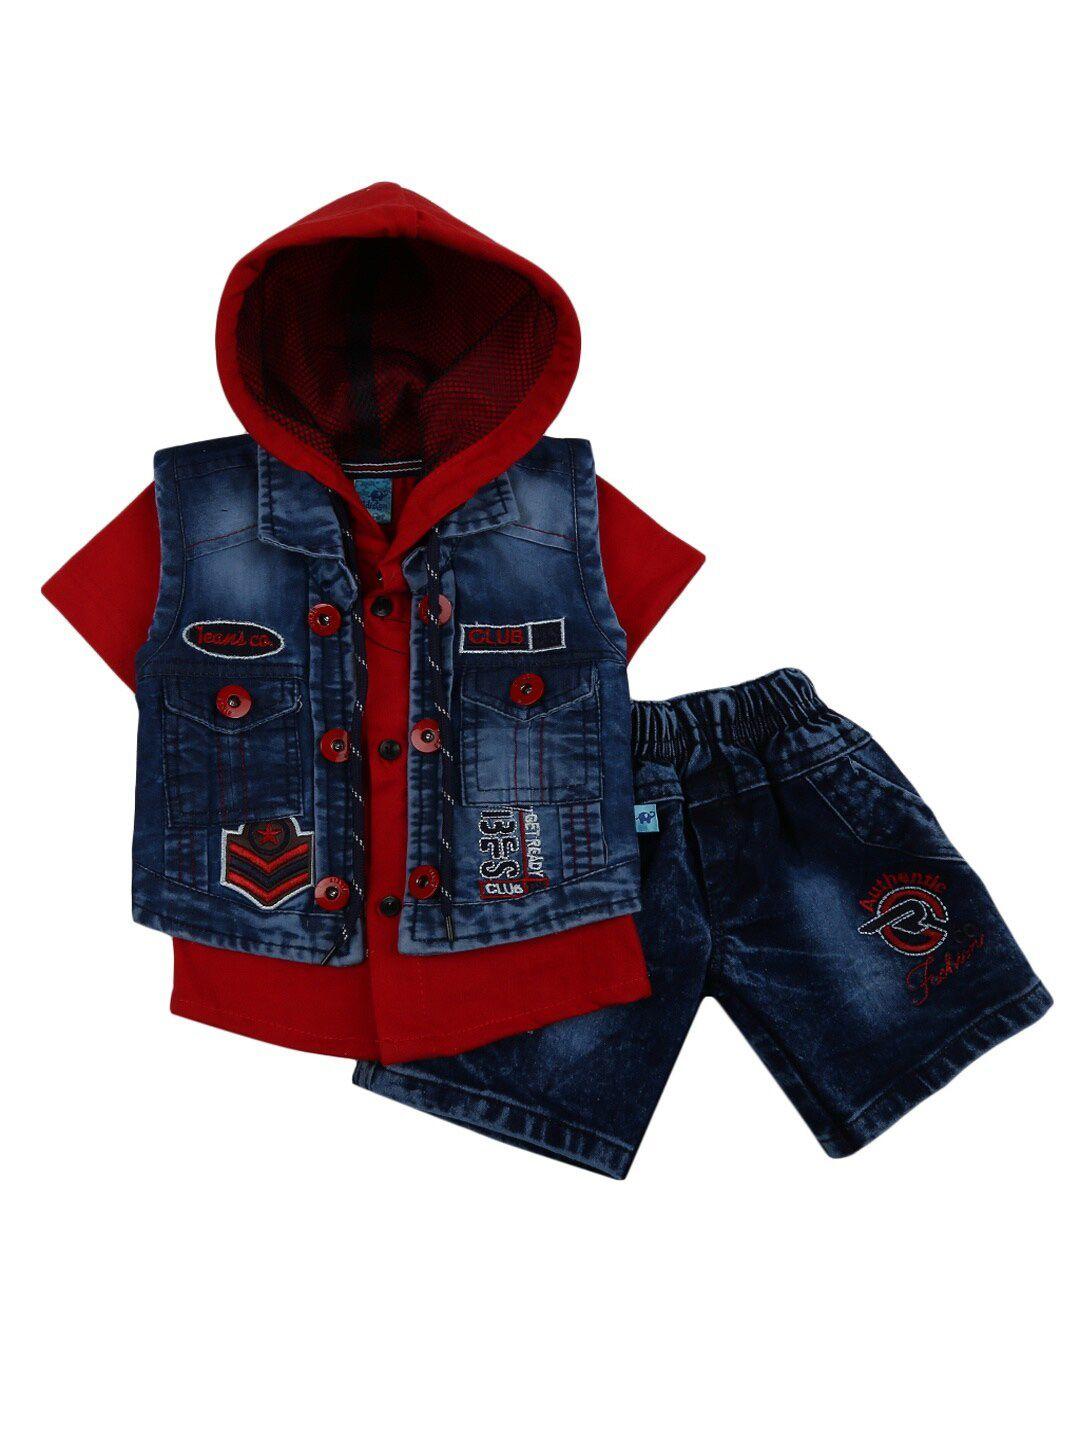 v-mart unisex kids red & navy blue printed shirt with shorts